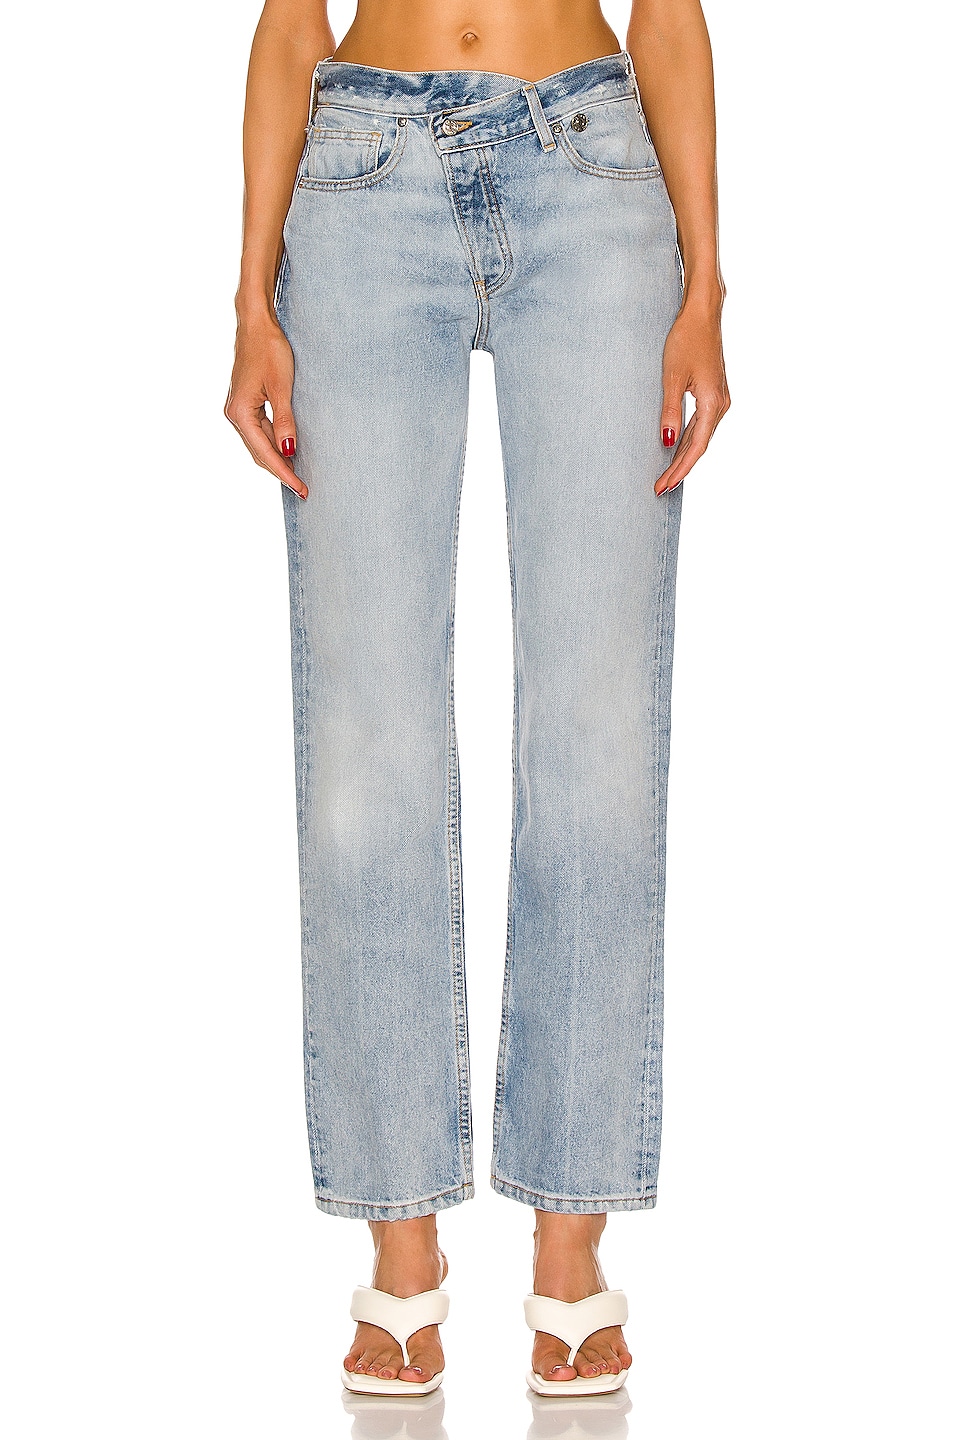 Image 1 of EB Denim Crossover Pant in Cielo